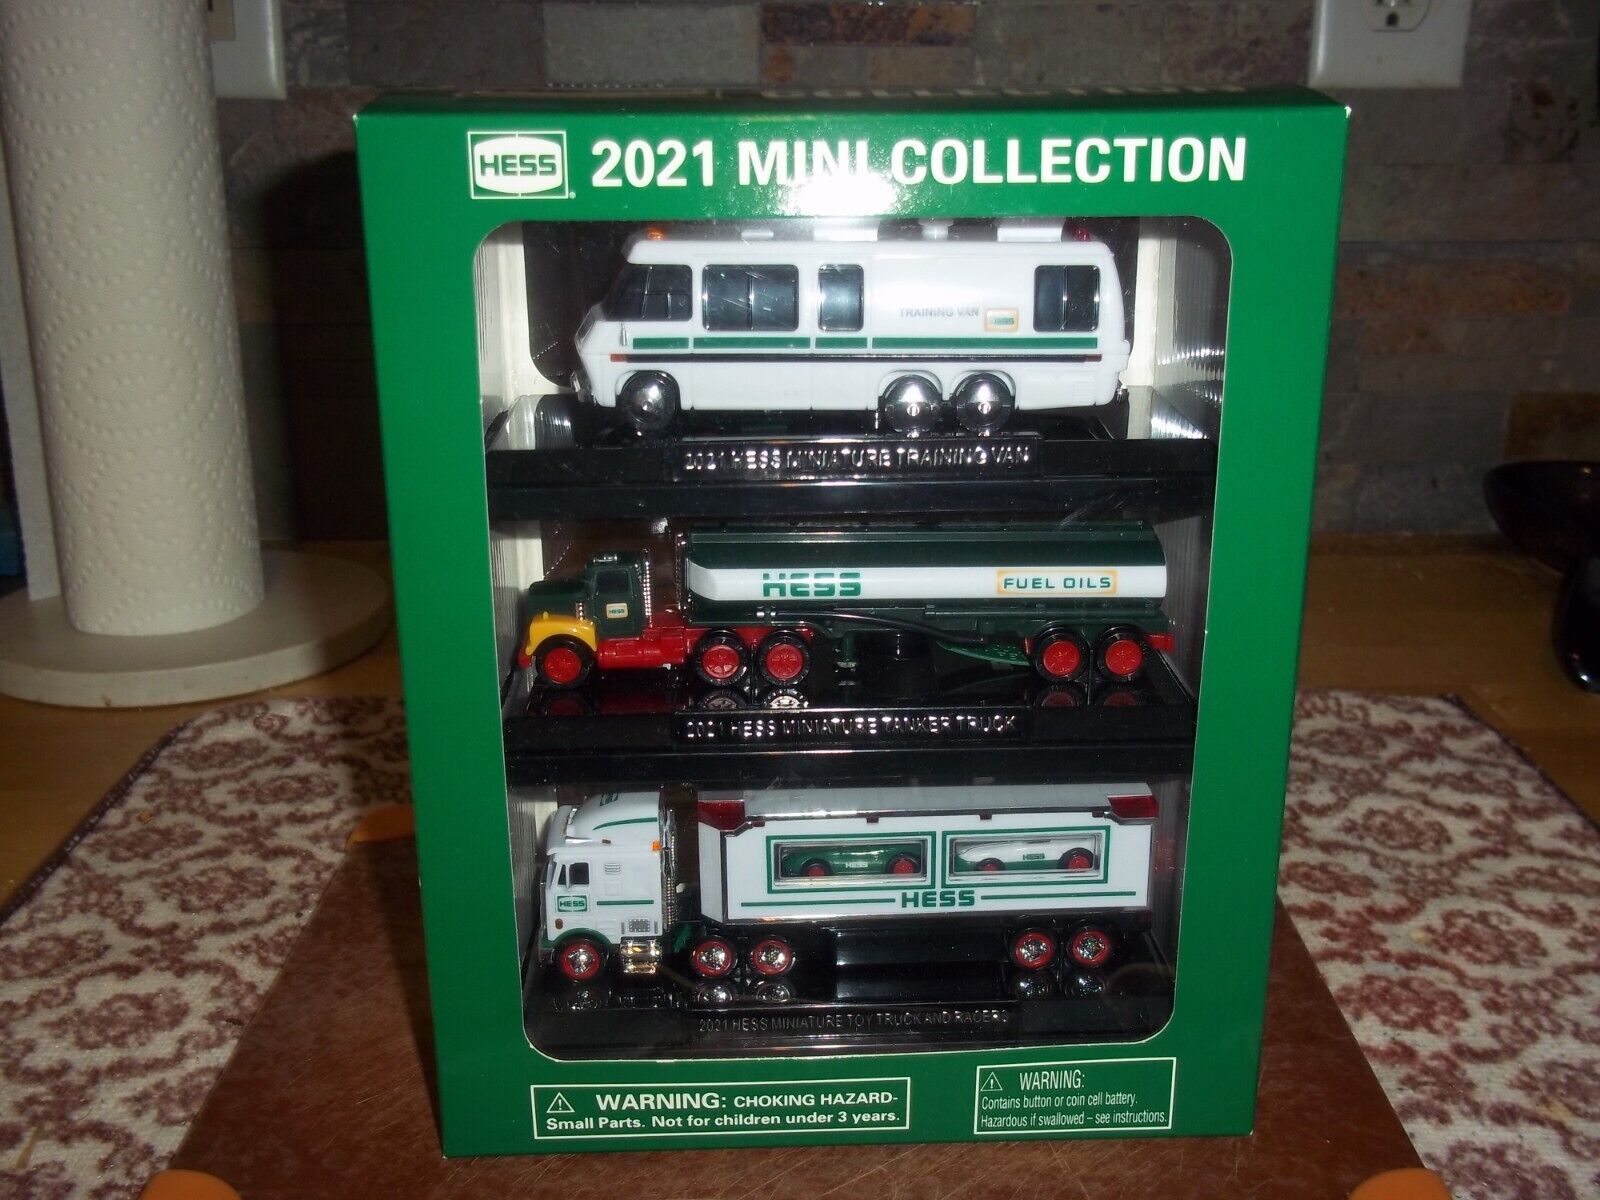 2021 Hess Mini Toy Truck Collection Unopened Box